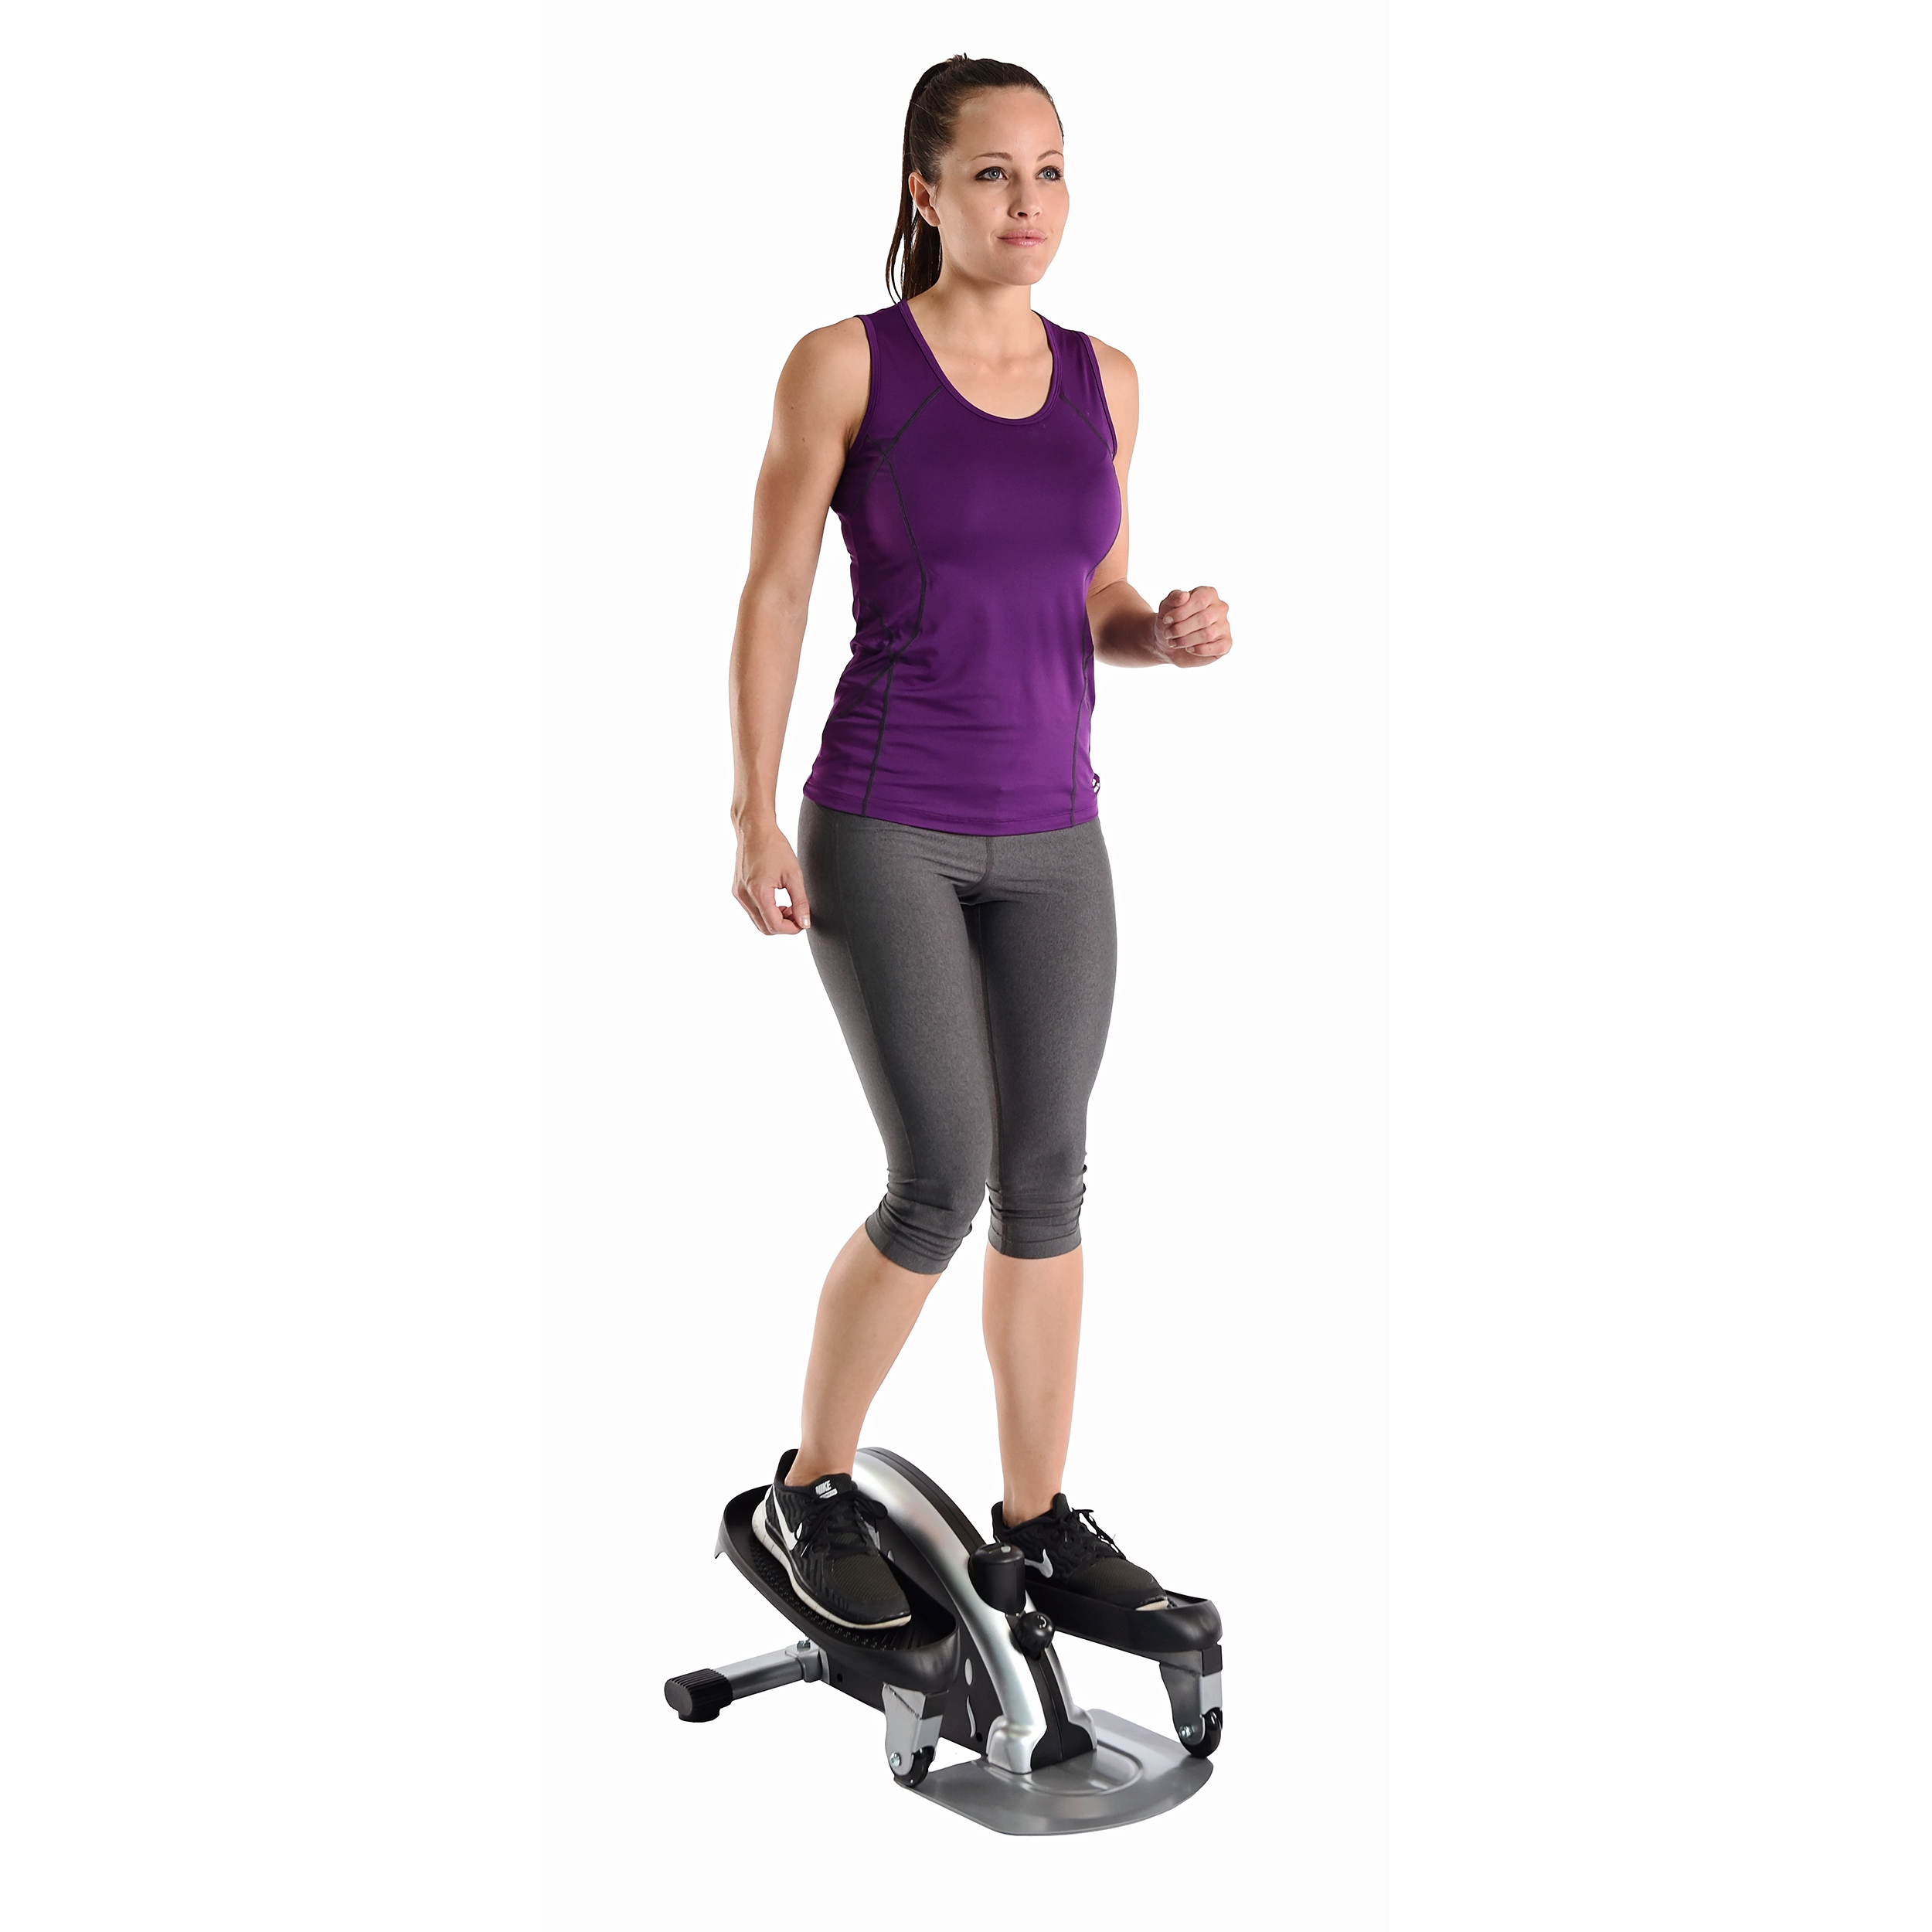 Stamina Inmotion Compact Strider With Cords With Smart Workout App